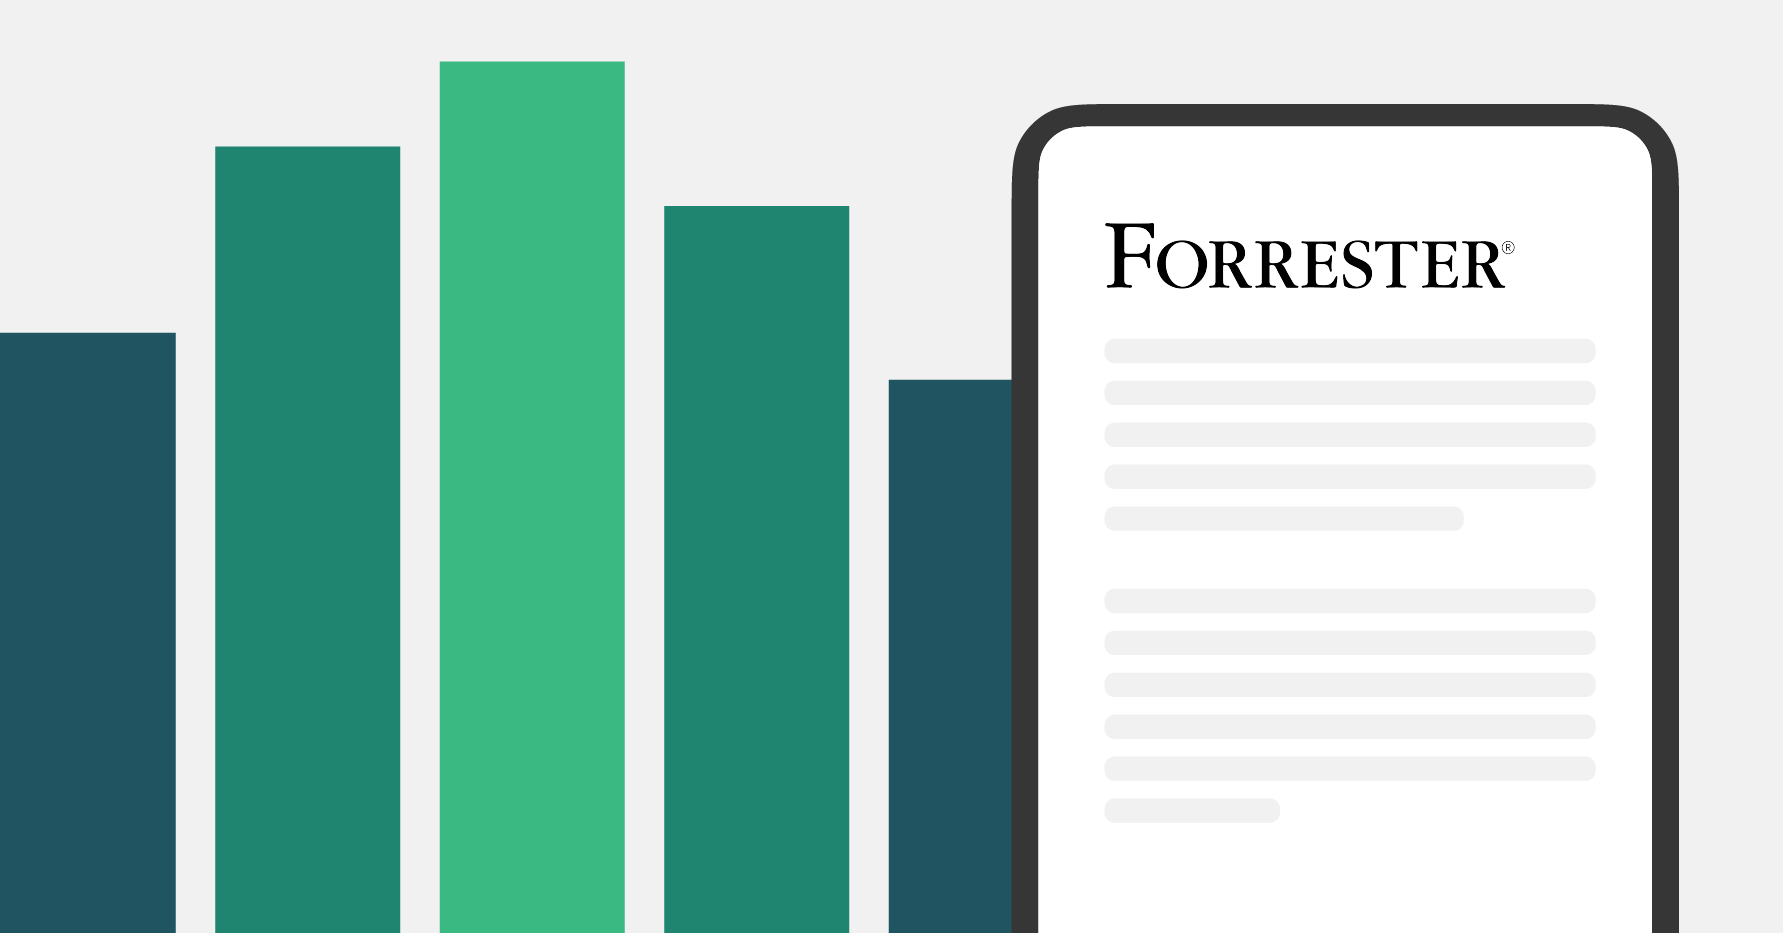 Stylized illustration of a Forrester report on a tablet